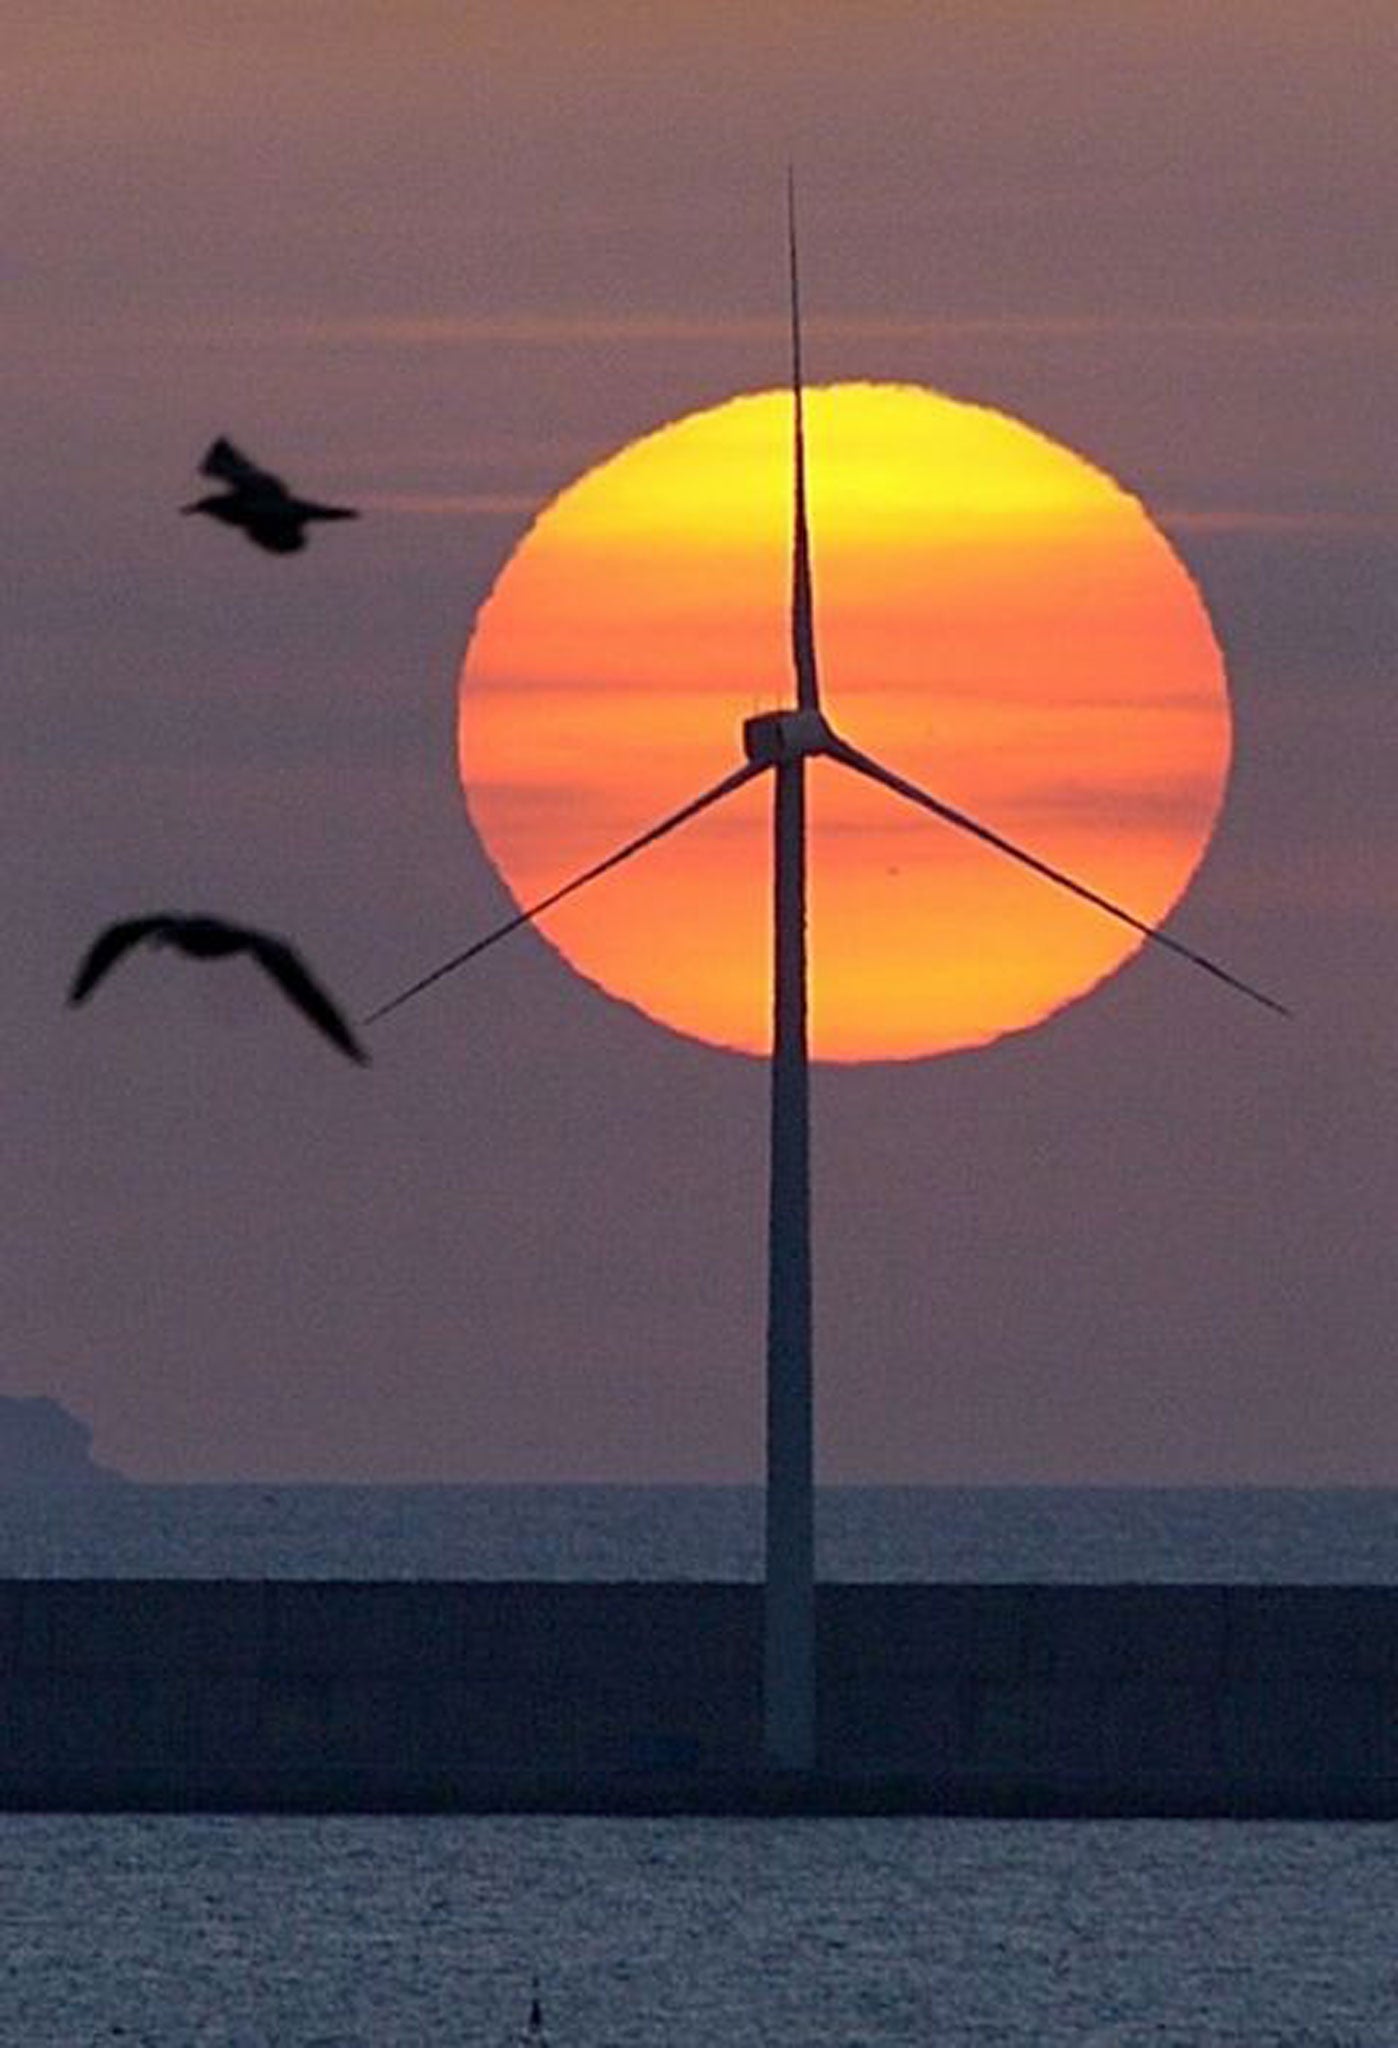 MPs say an incoherent stance on green energy has left investors over-exposed to fossil-fuel firms